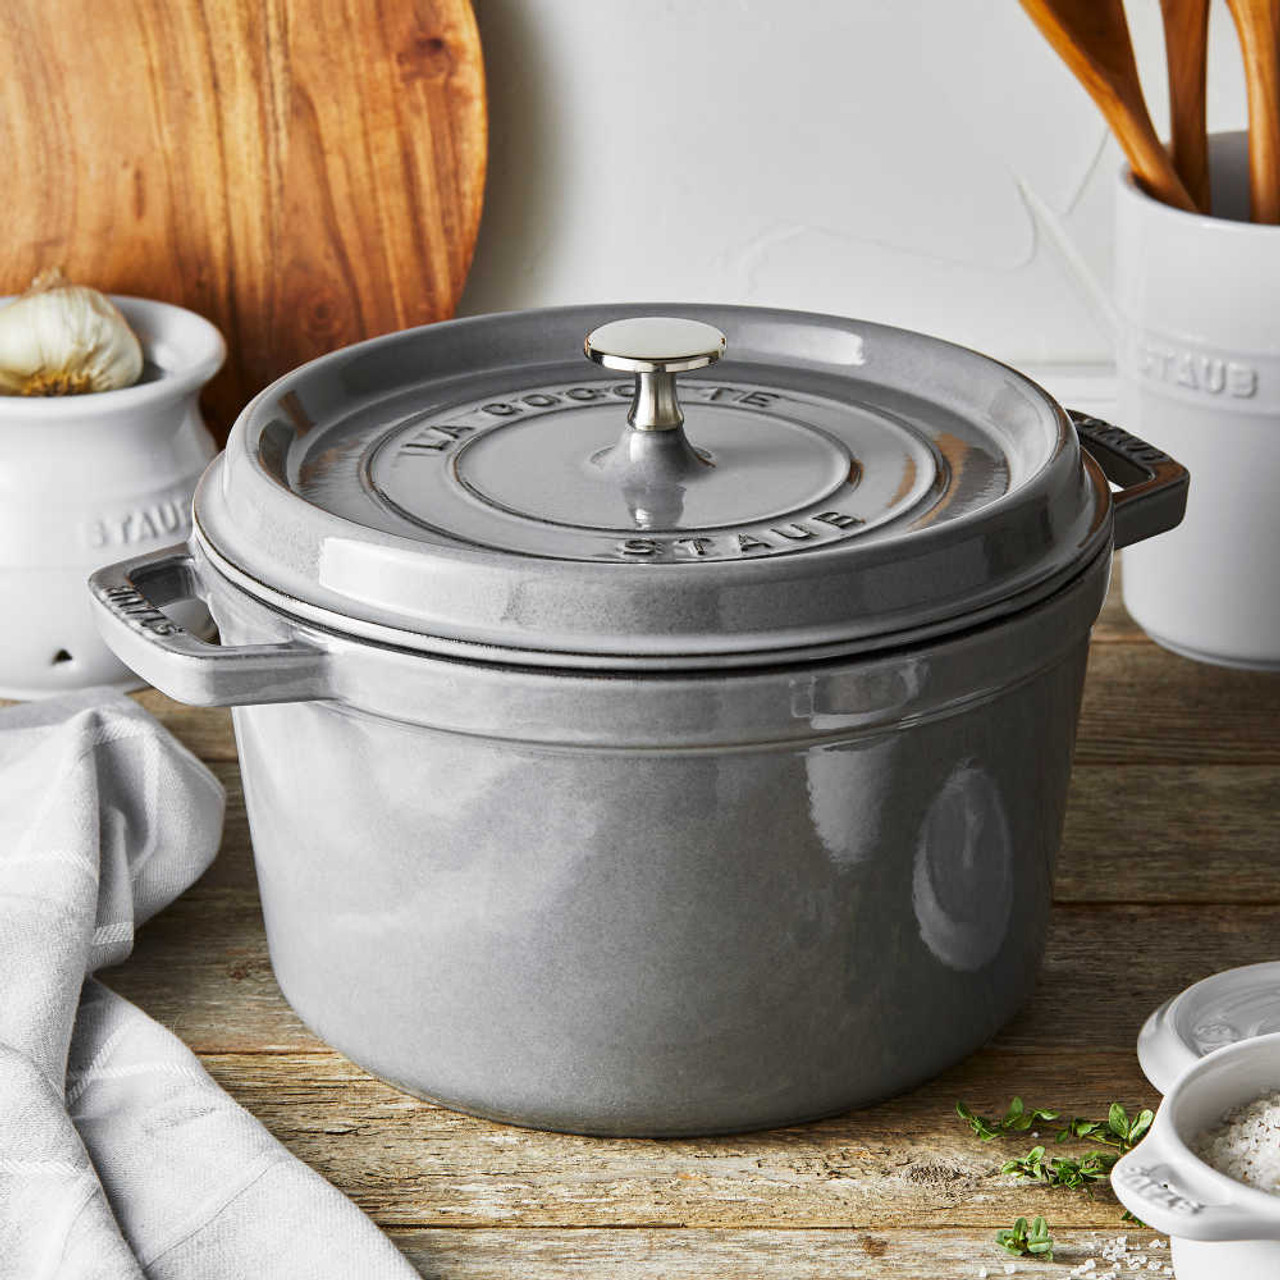 https://cdn11.bigcommerce.com/s-hccytny0od/images/stencil/1280x1280/products/5755/26615/Staub_Cast_Iron_Tall_Cocotte_in_Graphite_Grey__31725.1702576310.jpg?c=2?imbypass=on